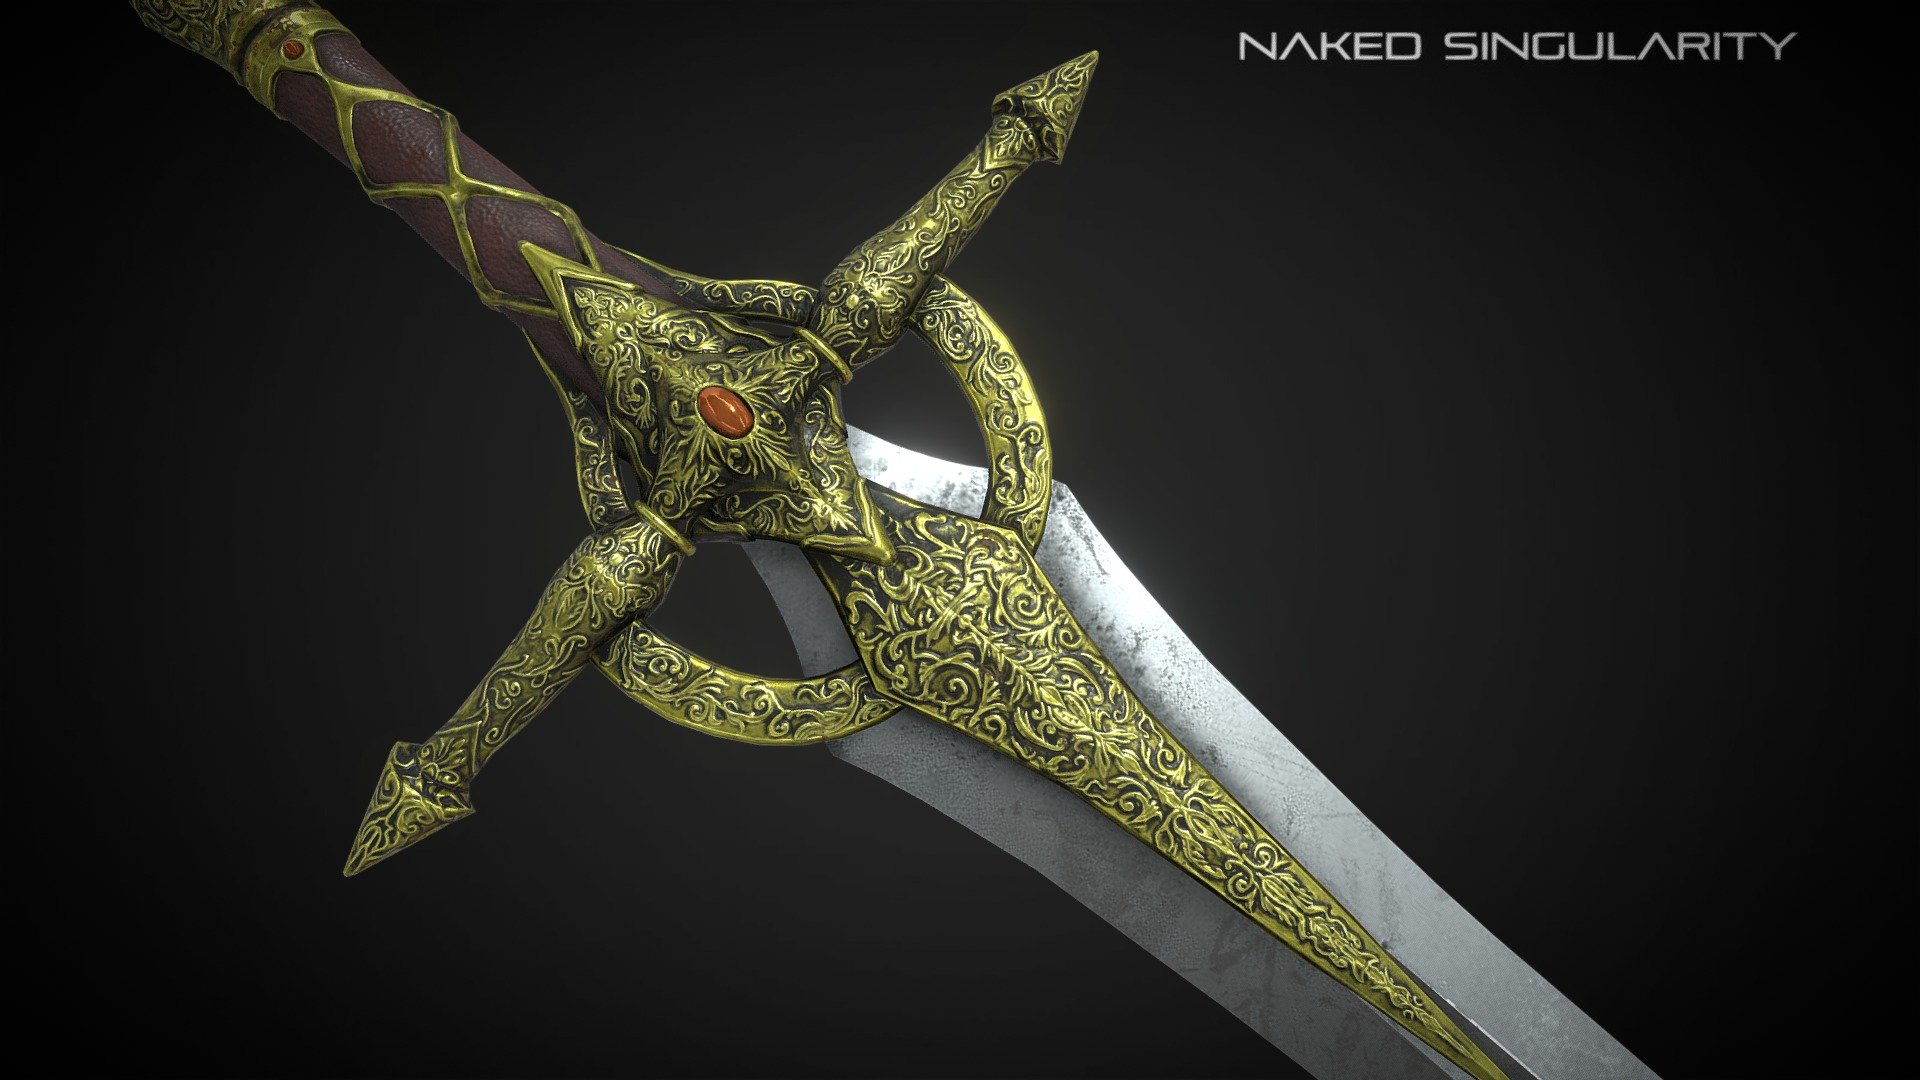 Dark fantasy golden sword | 4K | Low poly | PBR

Original concept by Naked Singularity. Inspire by Dark Souls triology and Elden Ring


High quality low poly model.
High resolution texture.
UV channel 2 unwrapped (for lightmap in Unity, Unreal Engine).
Real world scale.
PBR texturing.

Check out other Dark fantasy game asset here

Customer support: nakedsingularity.studio@gmail.com

Follow us on: Youtube | Facebook | Instagram | Twitter | Artstation - Dark fantasy golden sword | 4K | Low poly PBR - Buy Royalty Free 3D model by Naked Singularity (@nakedsingularity) 3d model